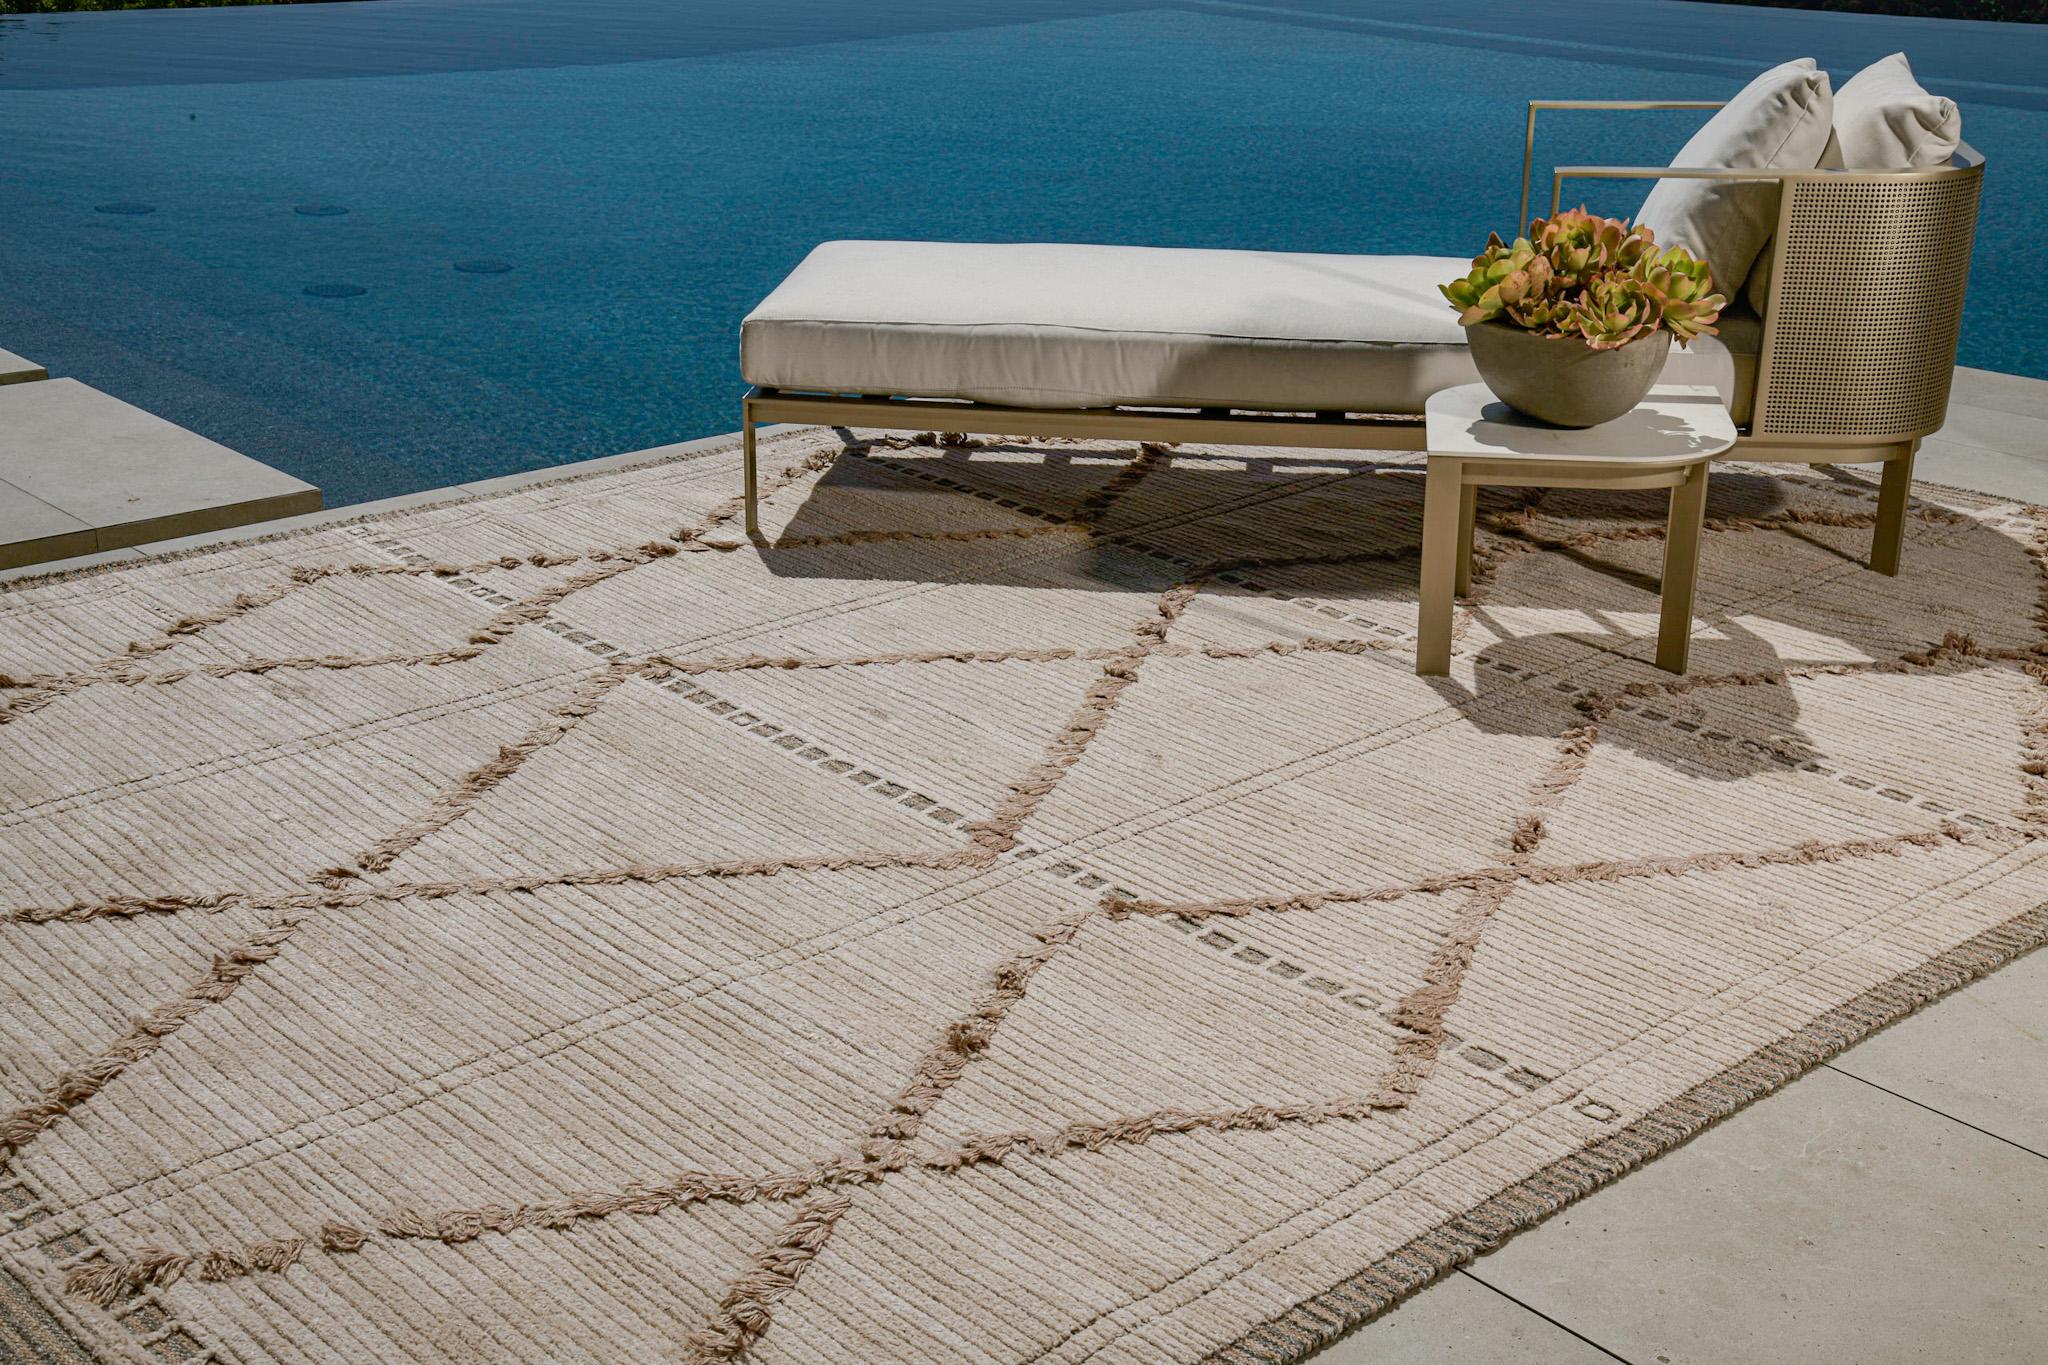 Enjoy the fresh air with Nasim, rugs that work indoors and out.

Rug Number
31436
Size
9' 1